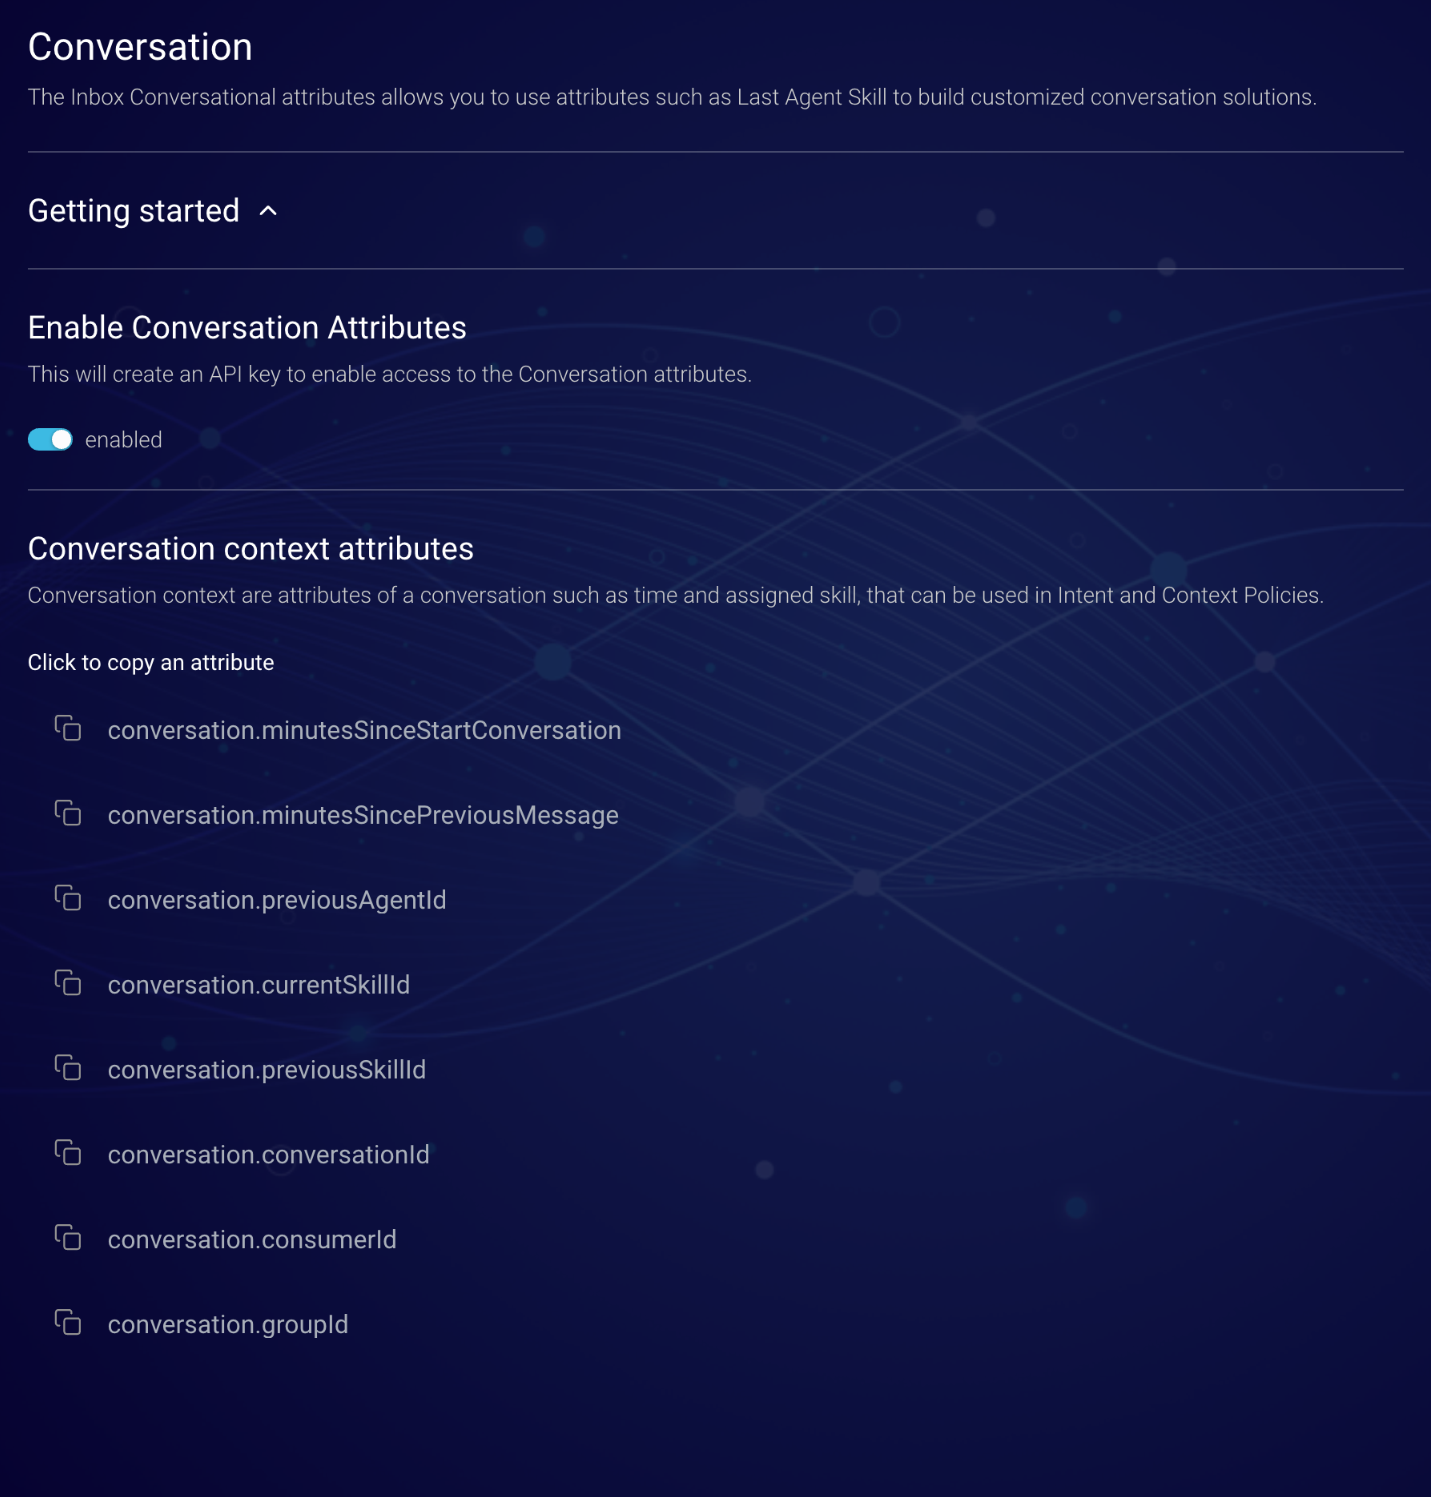 The Conversation page where you can enable conversation attributes and copy conversation context attributes